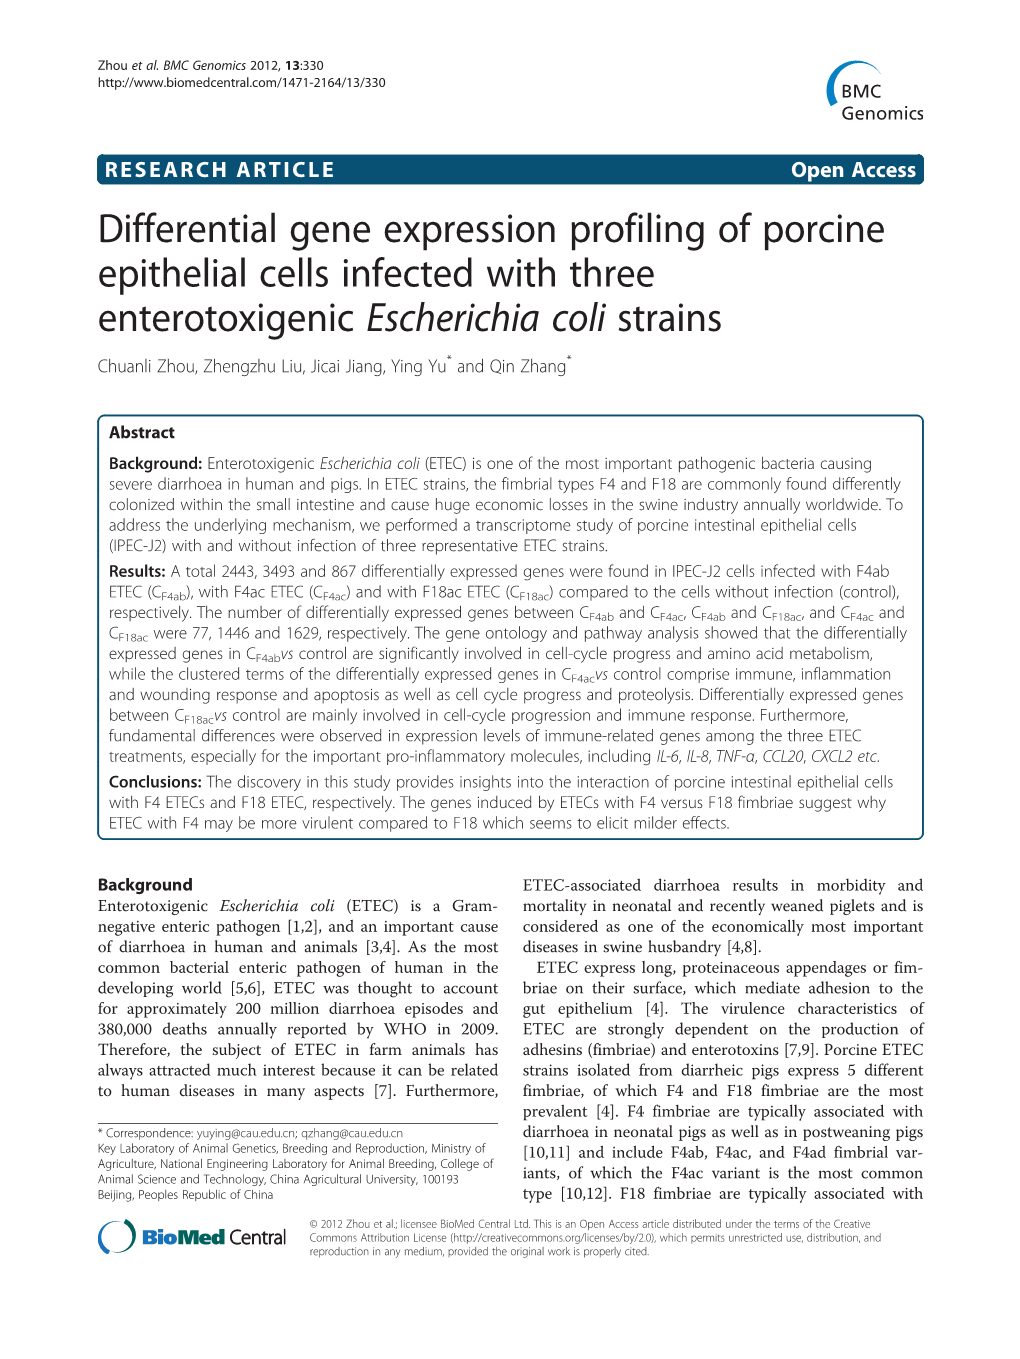 Differential Gene Expression Profiling of Porcine Epithelial Cells Infected